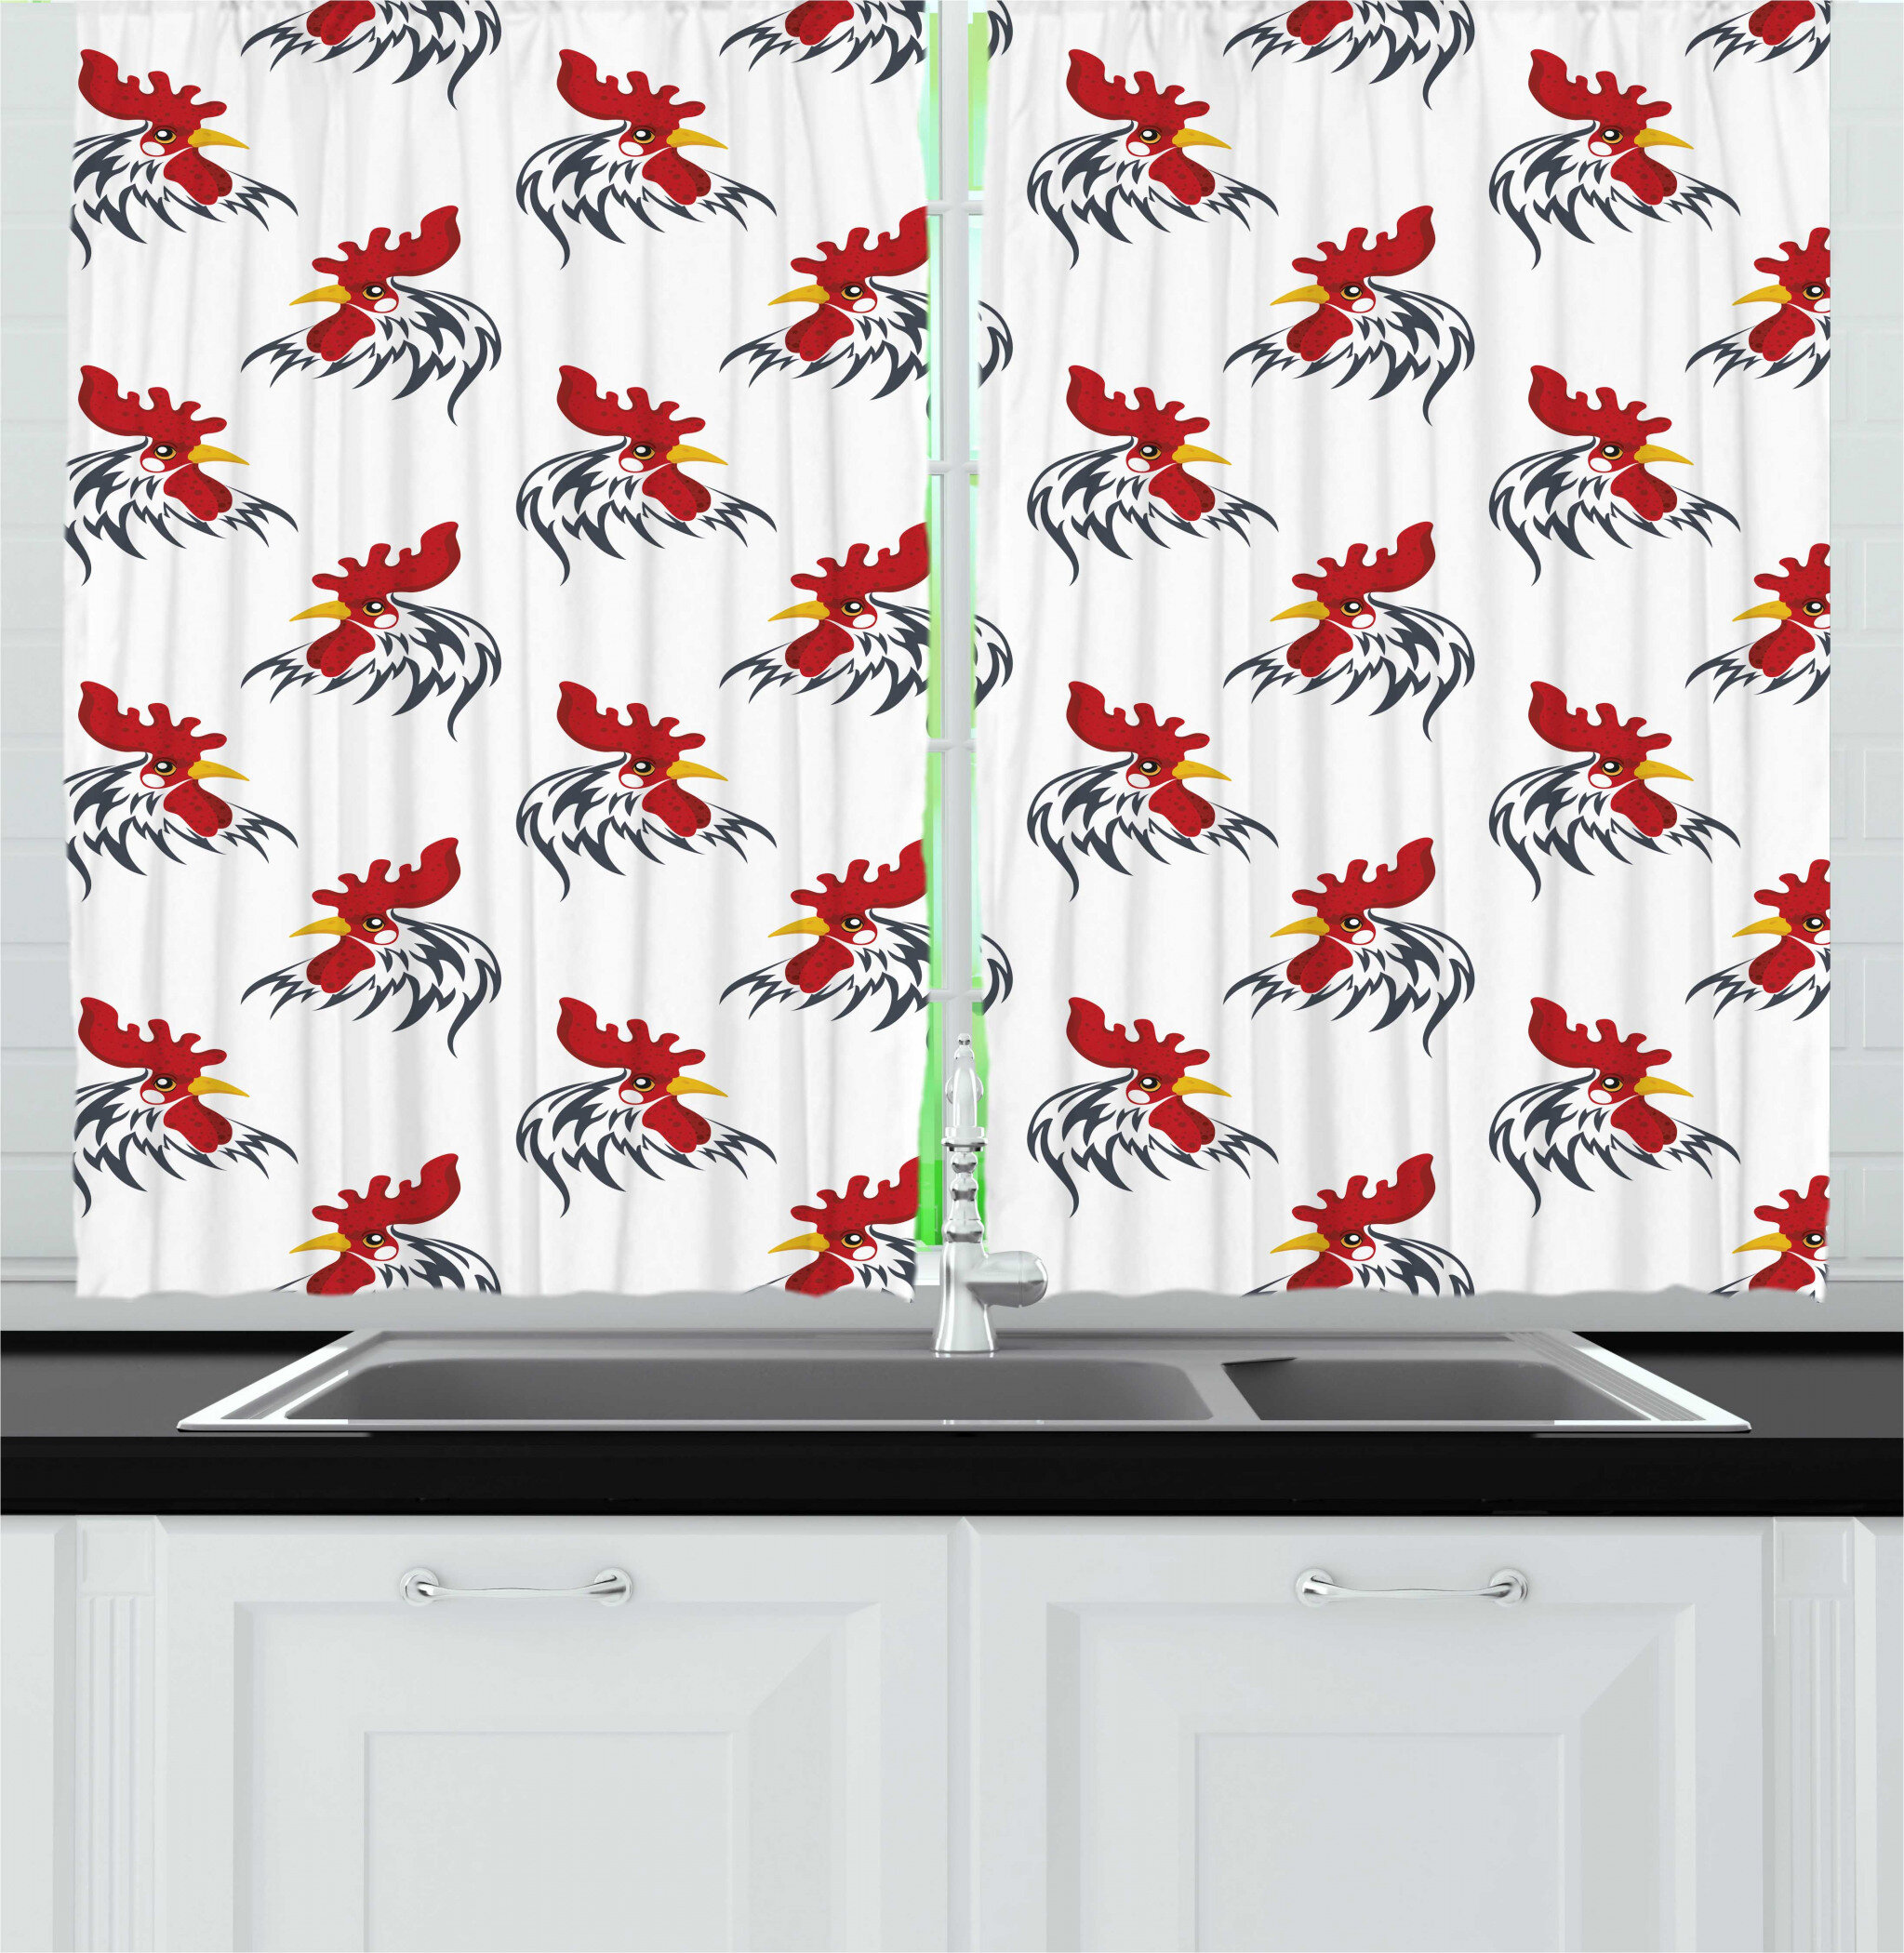 East Urban Home Rooster Repetitive Symbol Image Of Farm Animal Head On Plain Backdrop Art Print Kitchen Curtain Wayfair